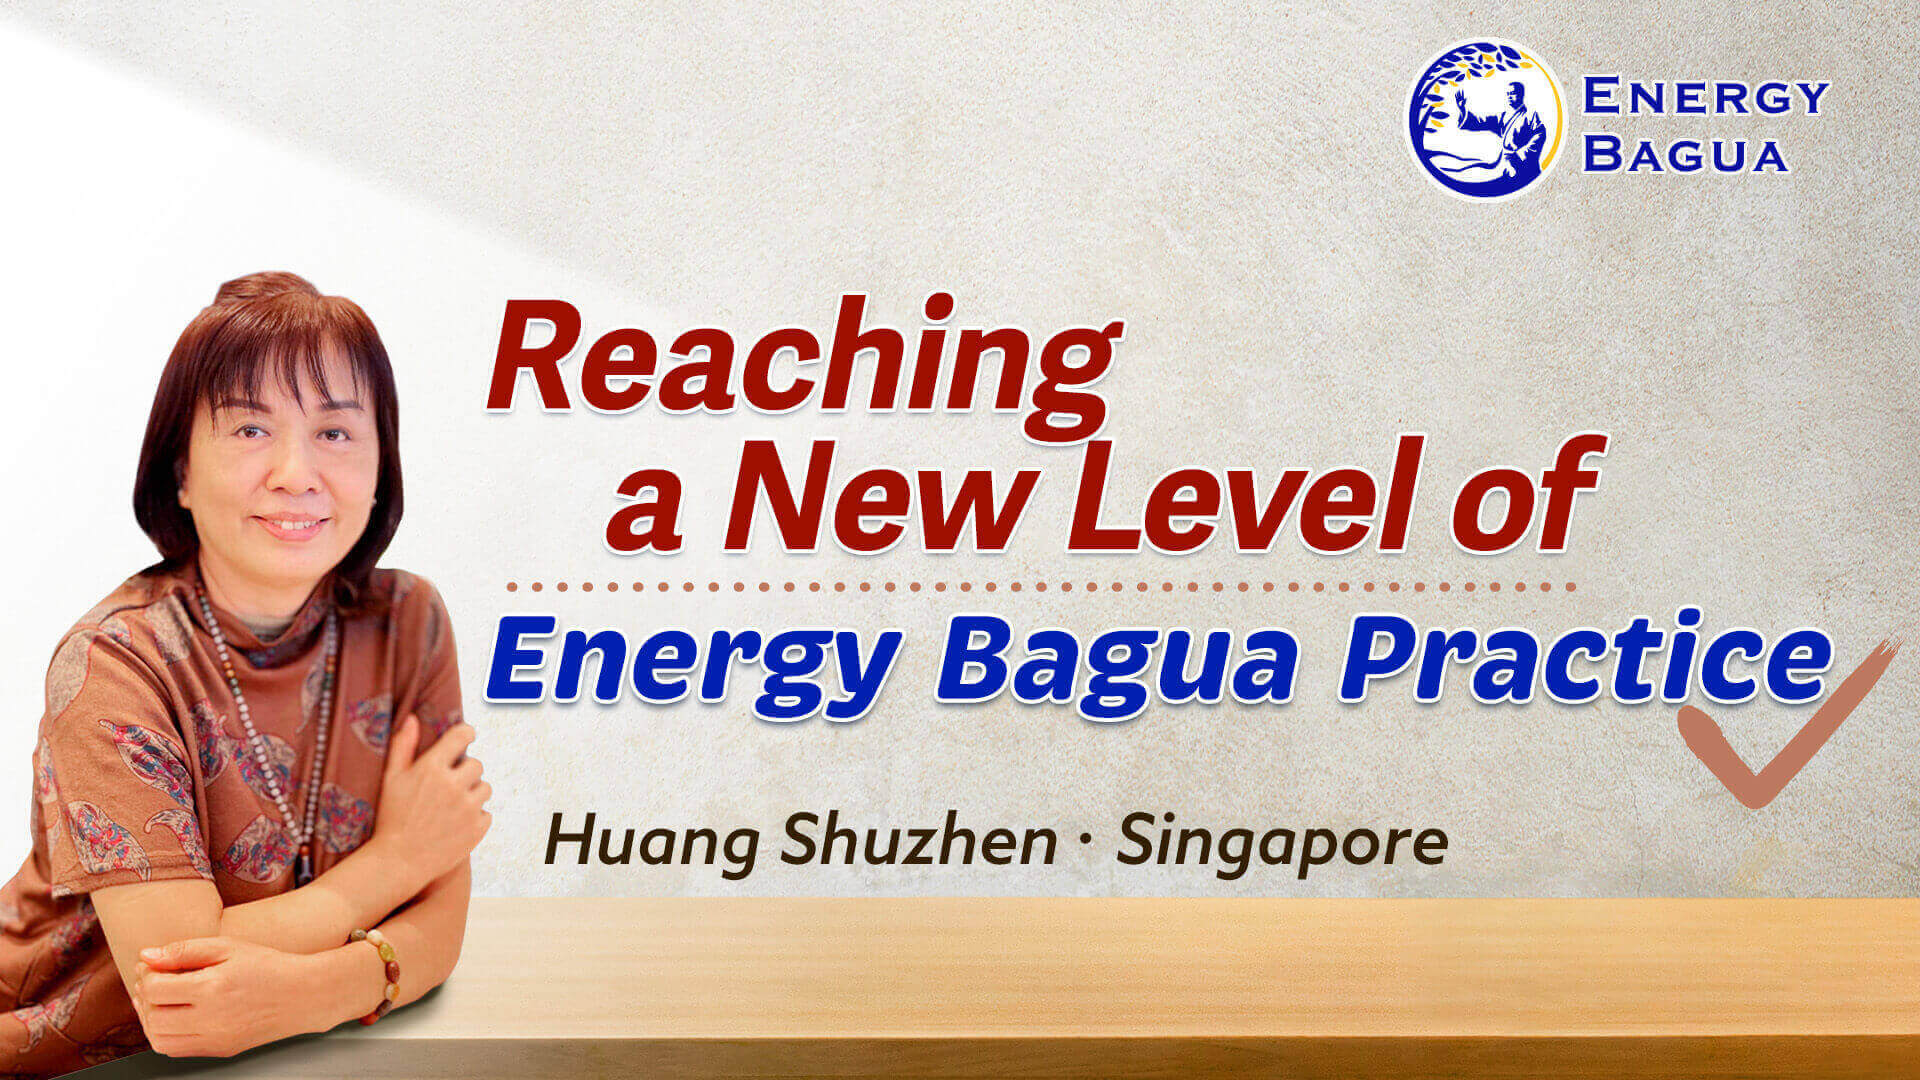 Reaching a New Level of Energy Bagua Practice